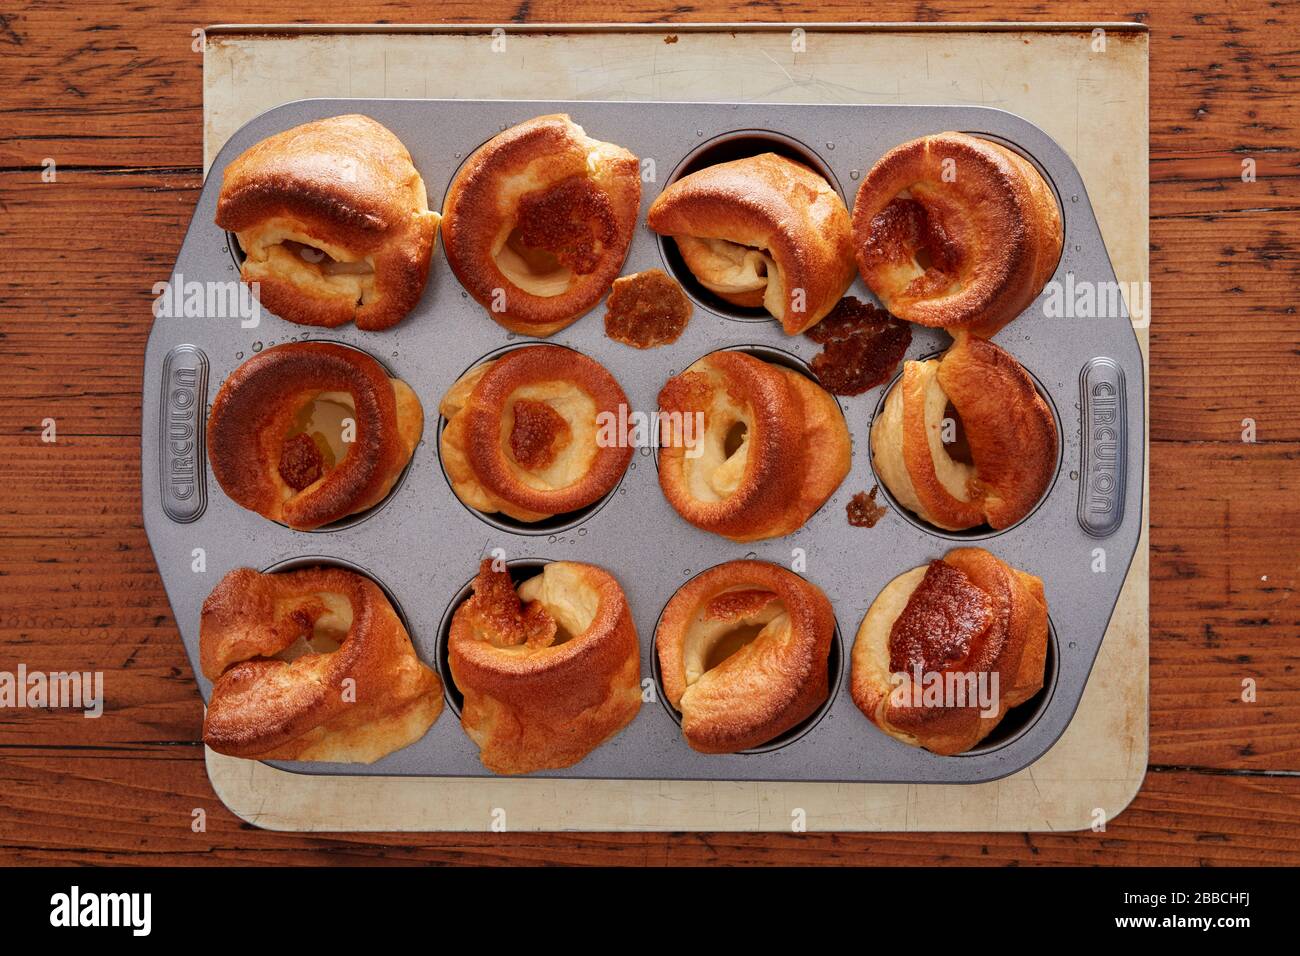 Yorkshire pudding, food, traditional, delicious, roast, english, yorkshire, pudding, baked, batter, british, dinner, homemade, fresh, cooked, lunch, Stock Photo